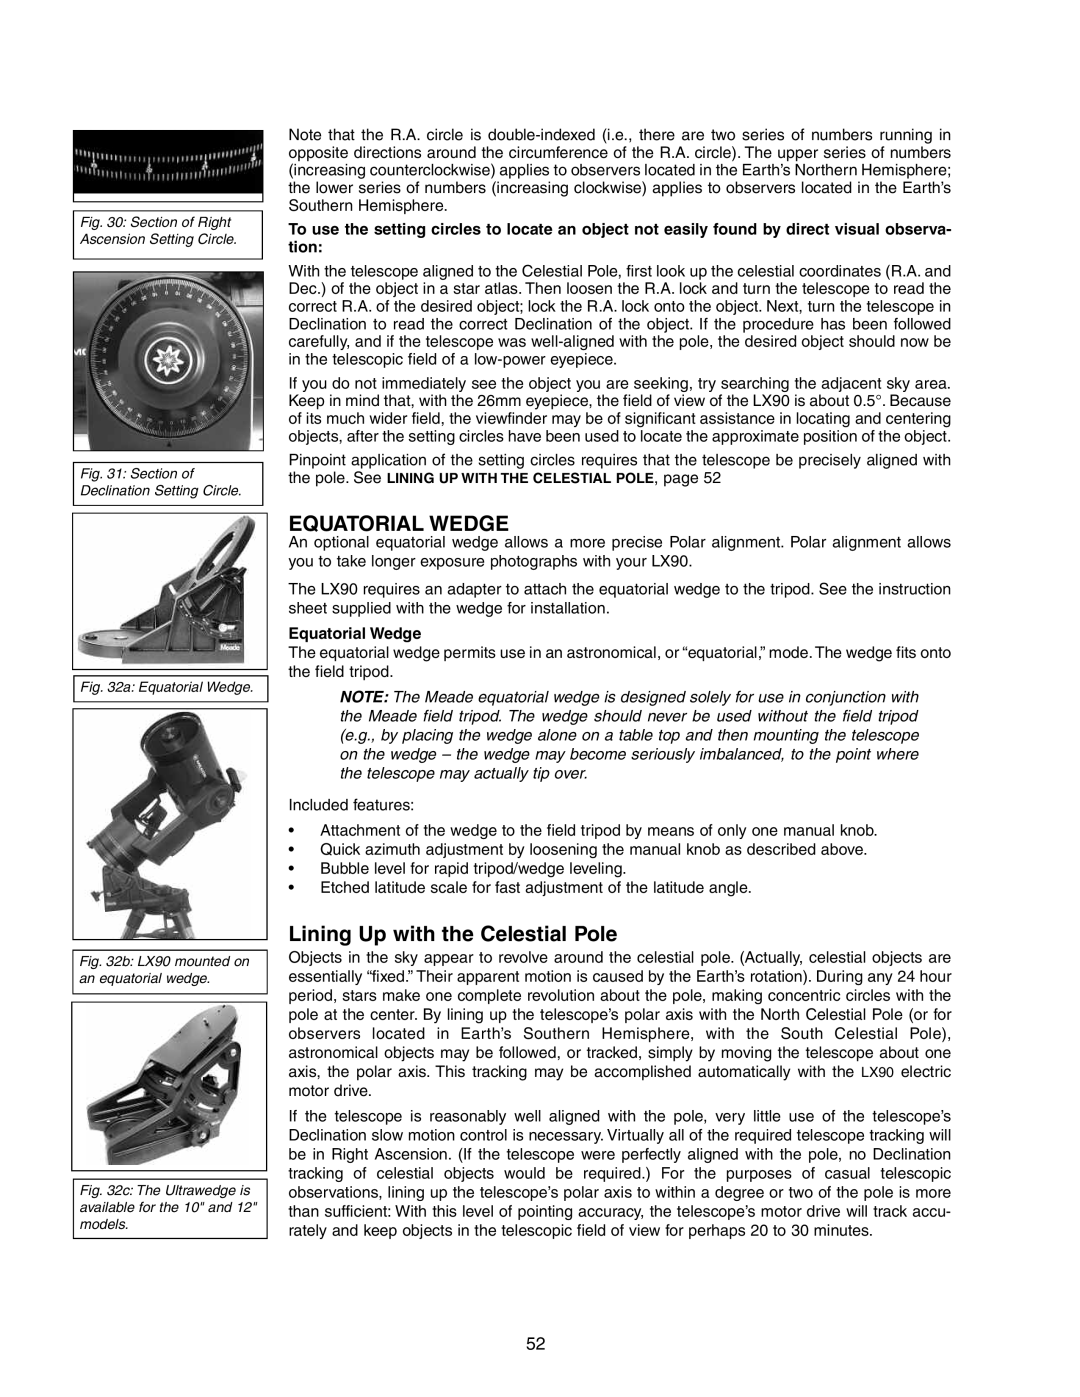 Meade LX90GPS instruction manual Equatorial Wedge, Lining Up with the Celestial Pole 